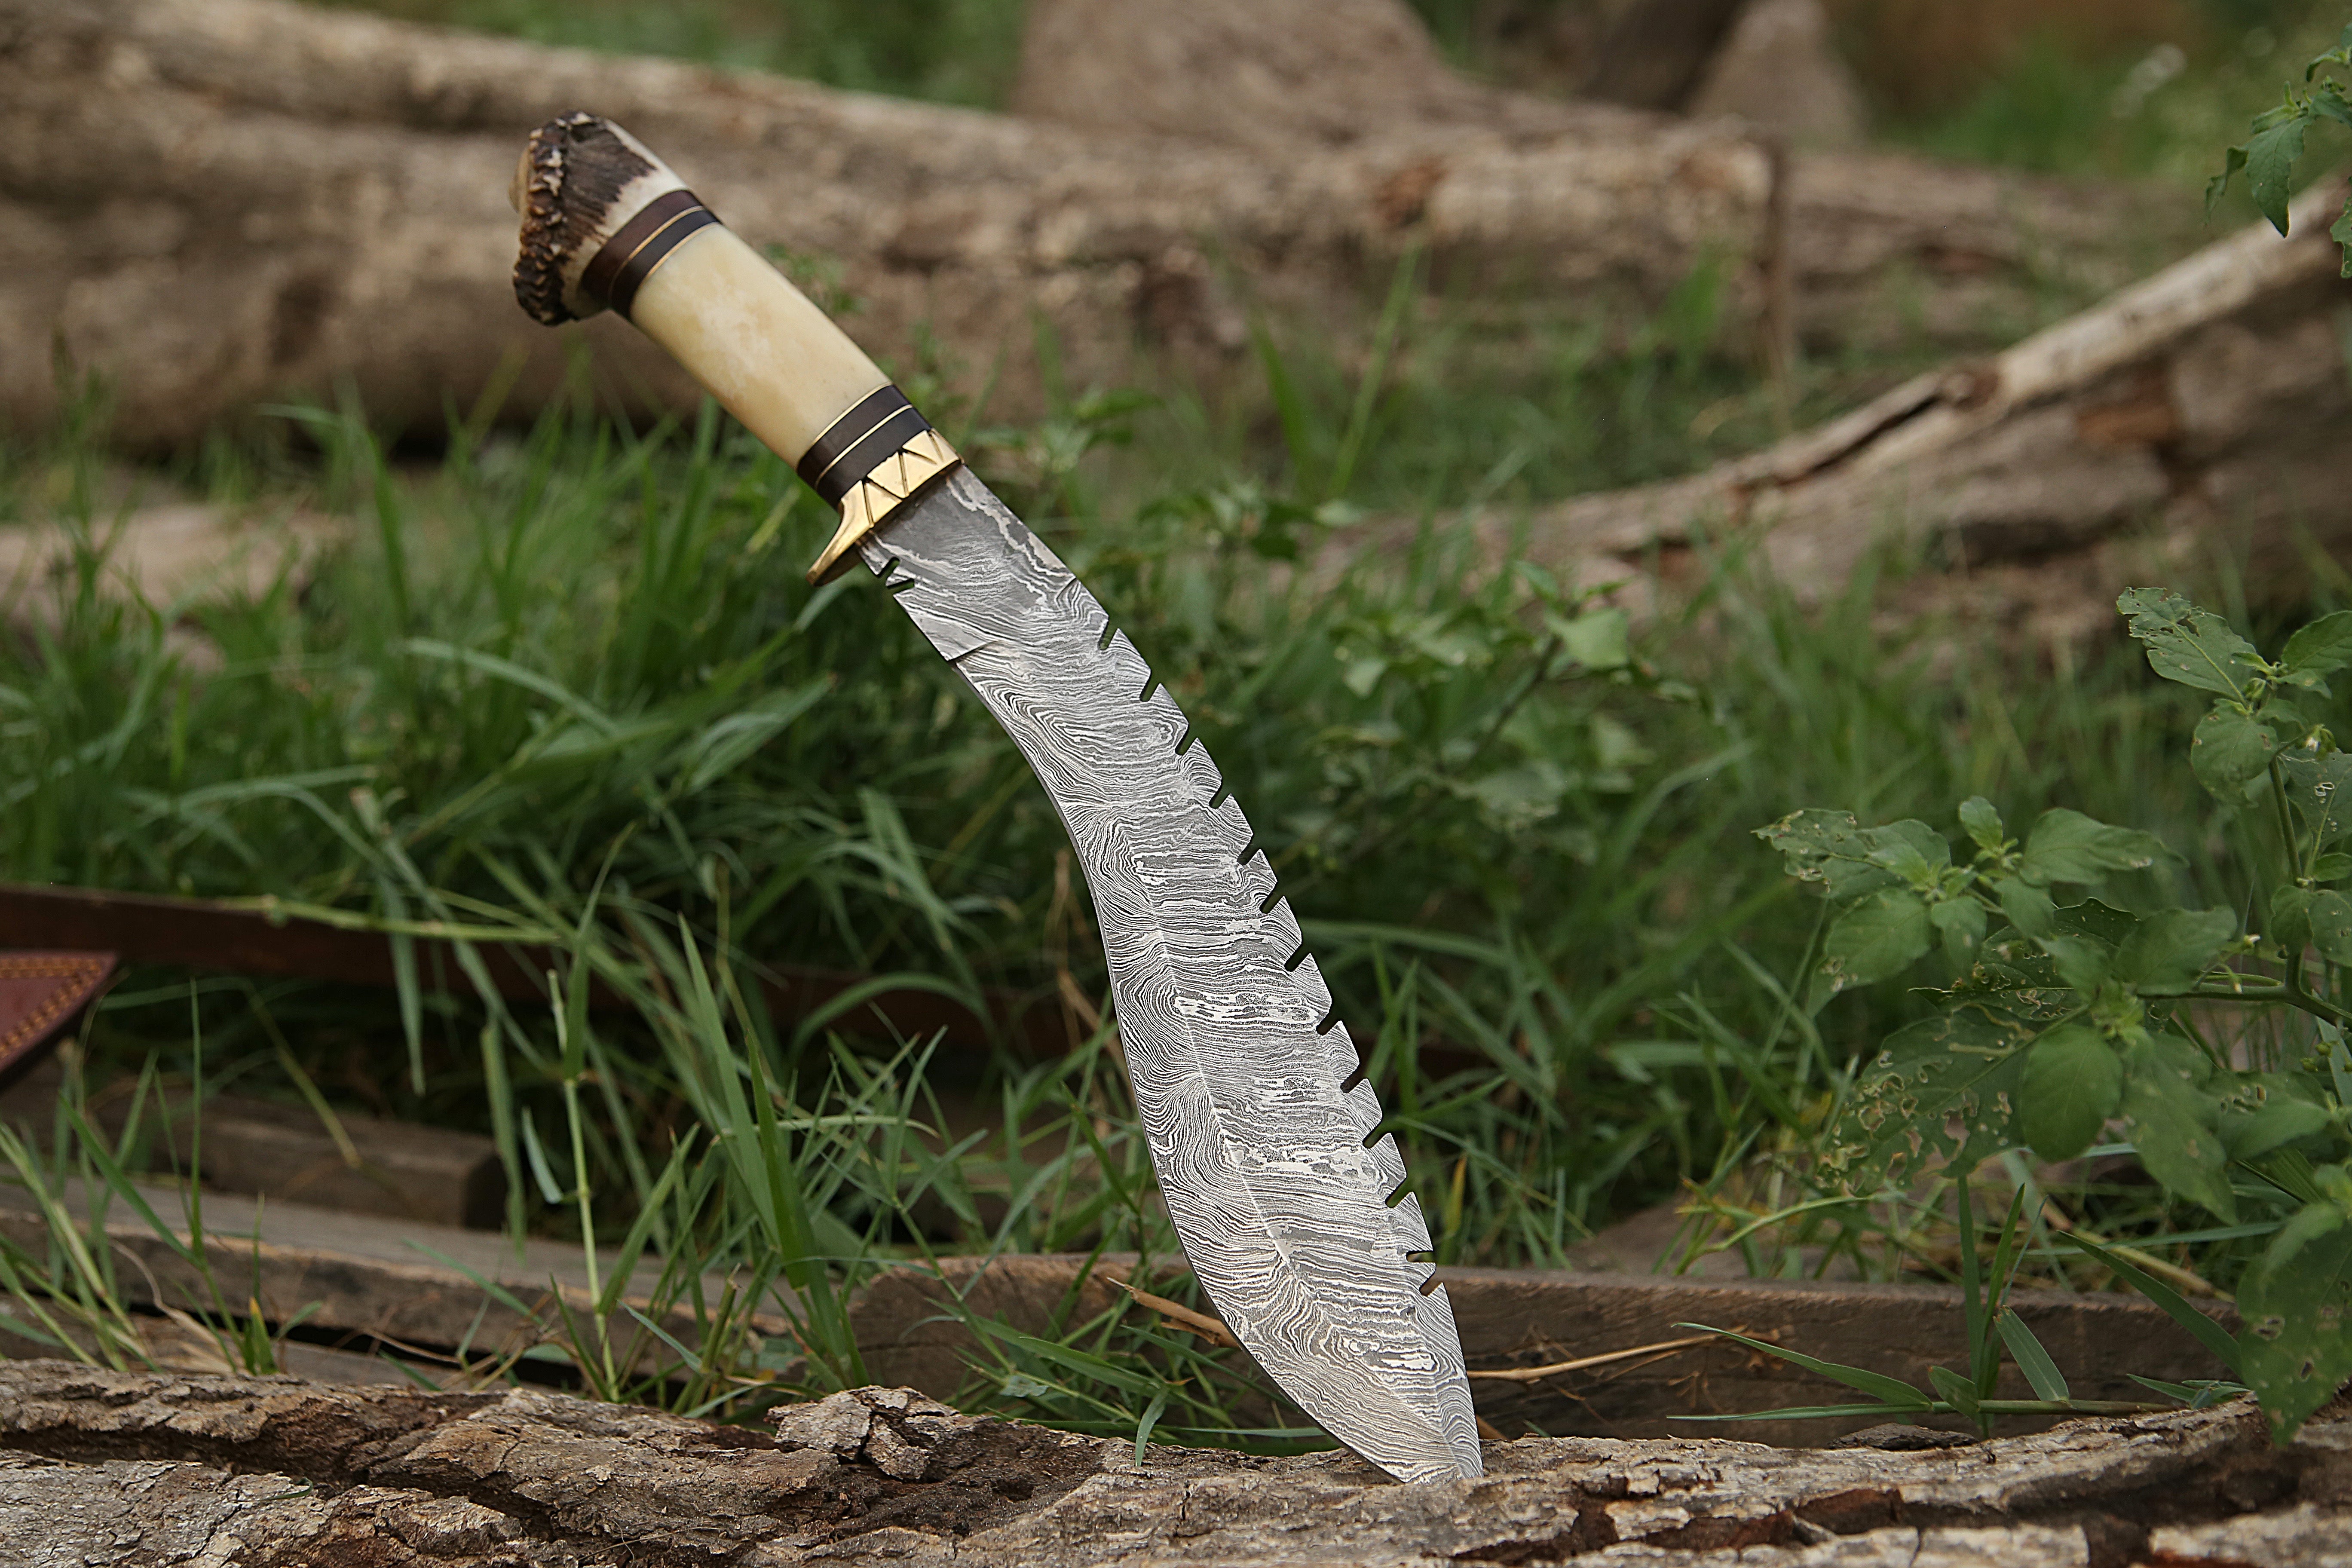 White Bone Kukri Knife Mosaic Pin Stag Horn Handle Damascus Steel Big Hunting Knife With Pouch.